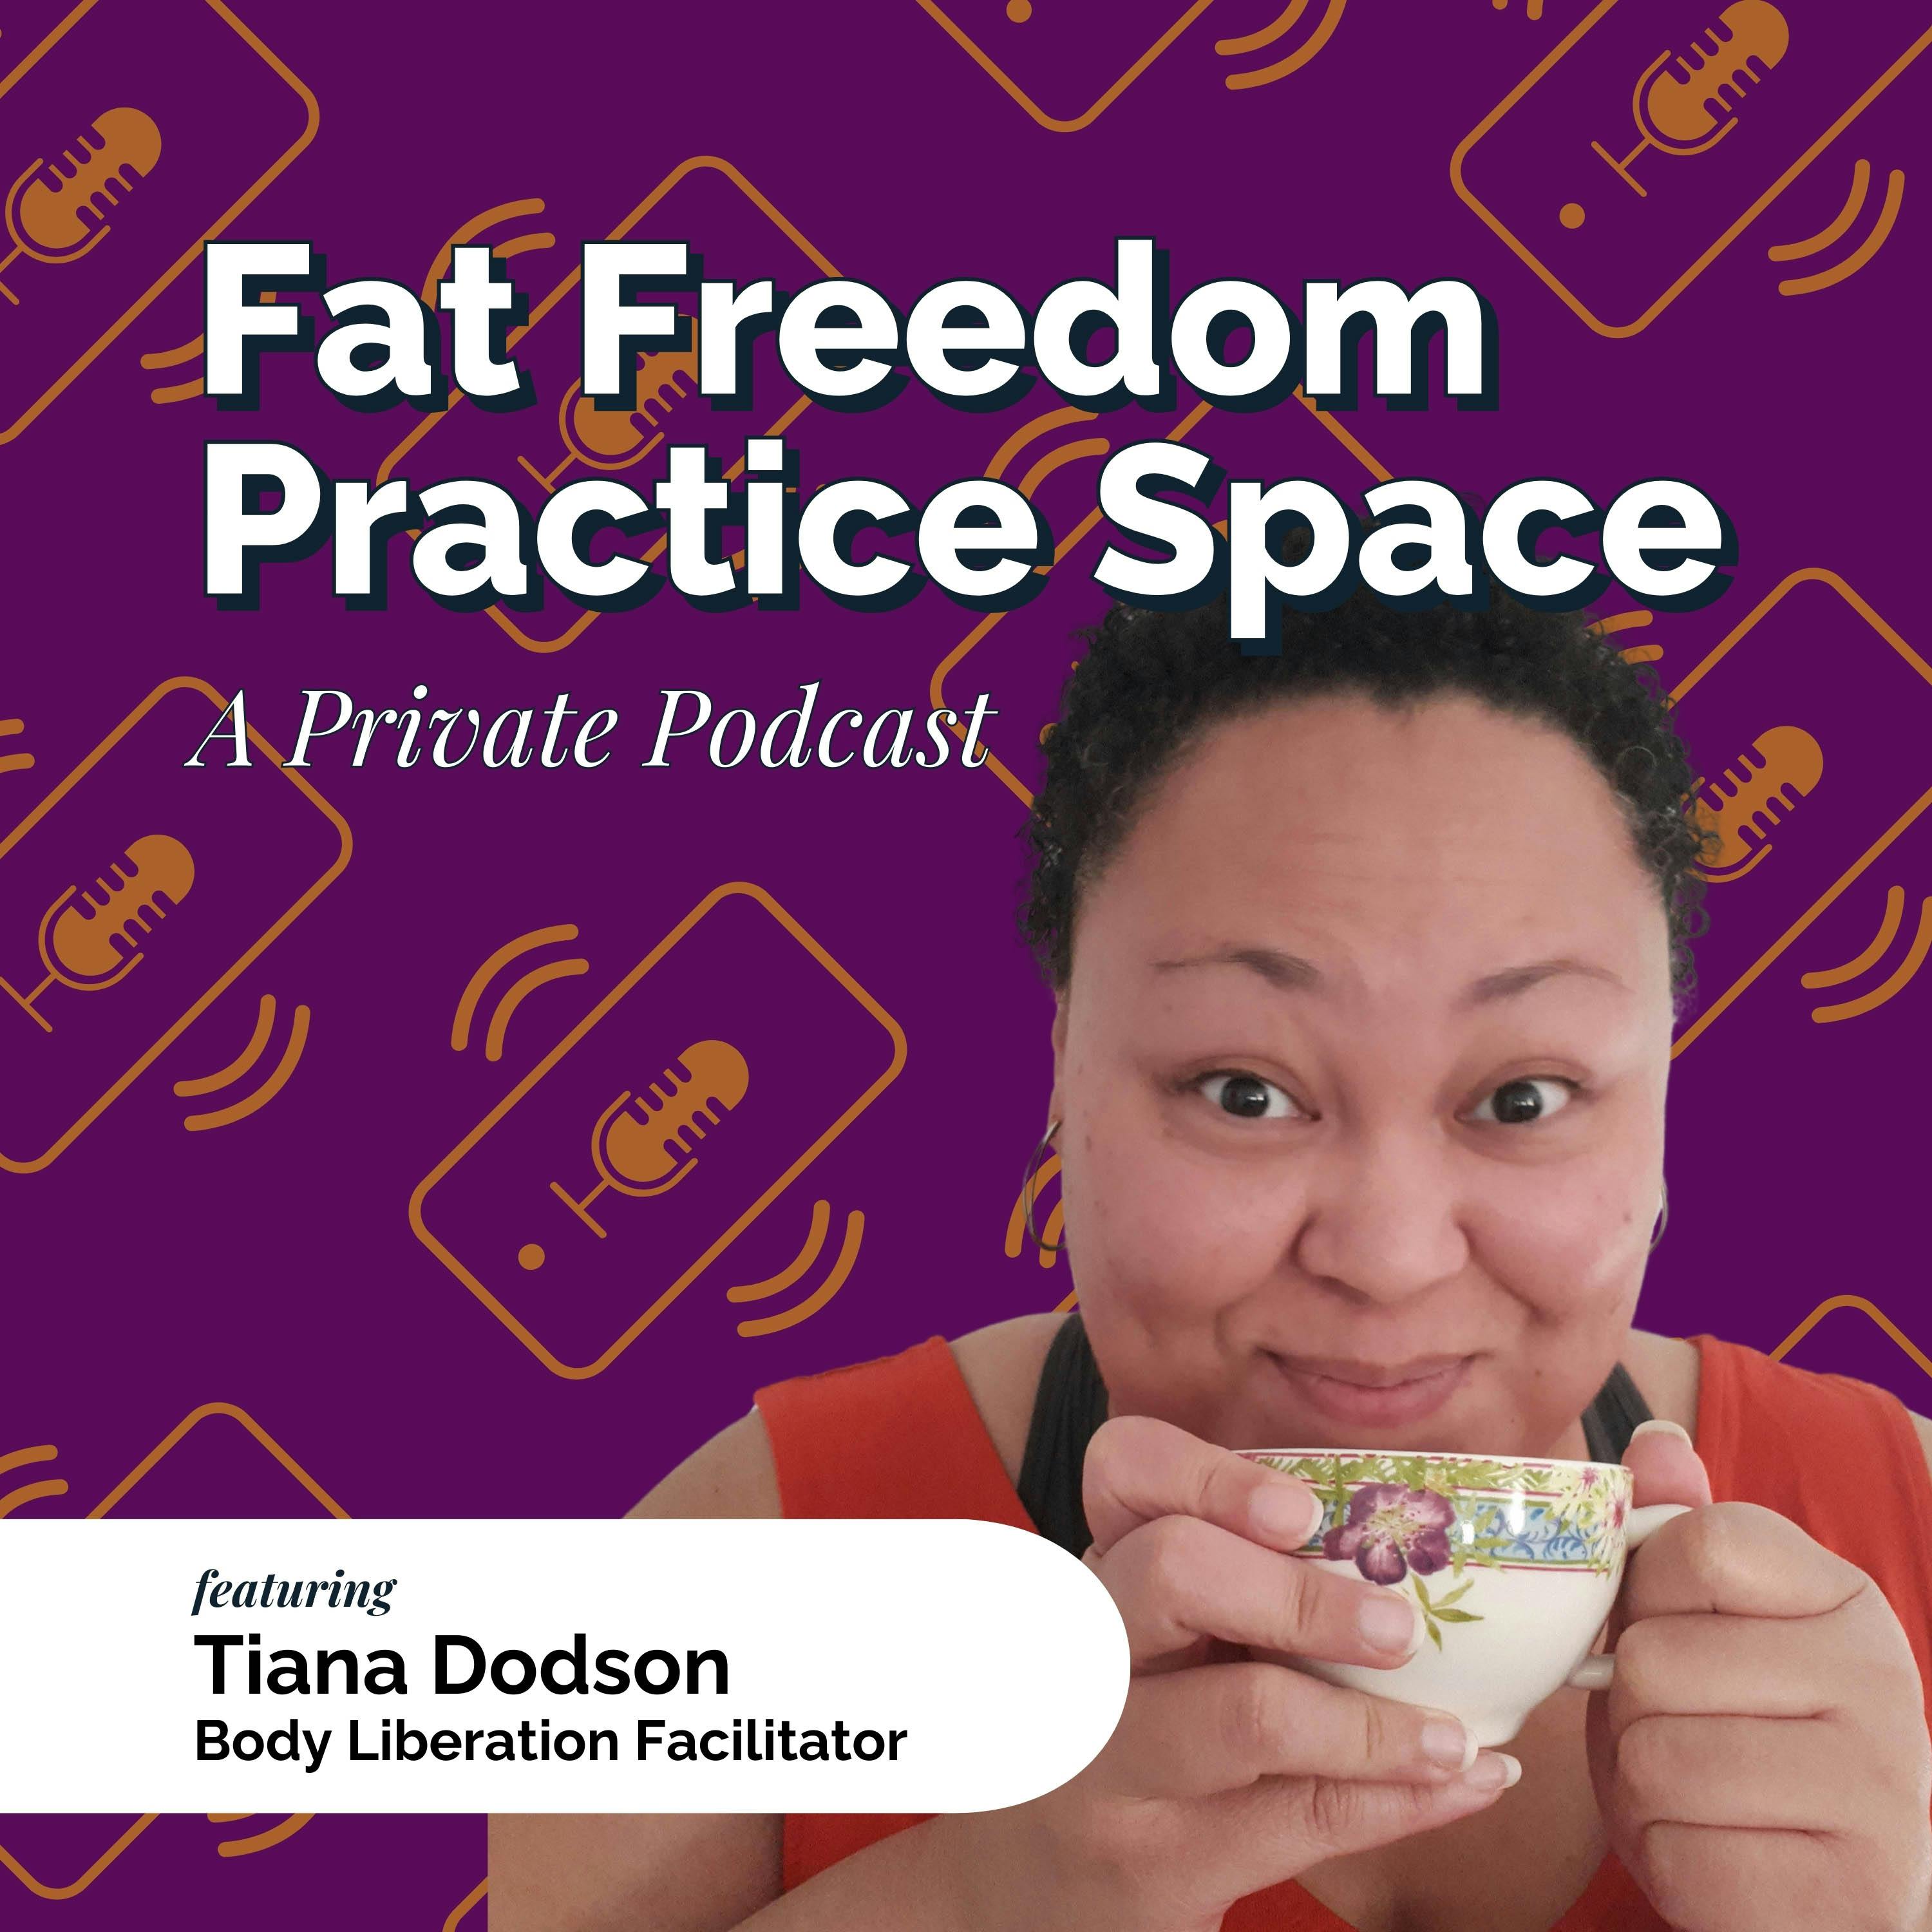 The Fat Freedom Practice Space Private Podcast cover art